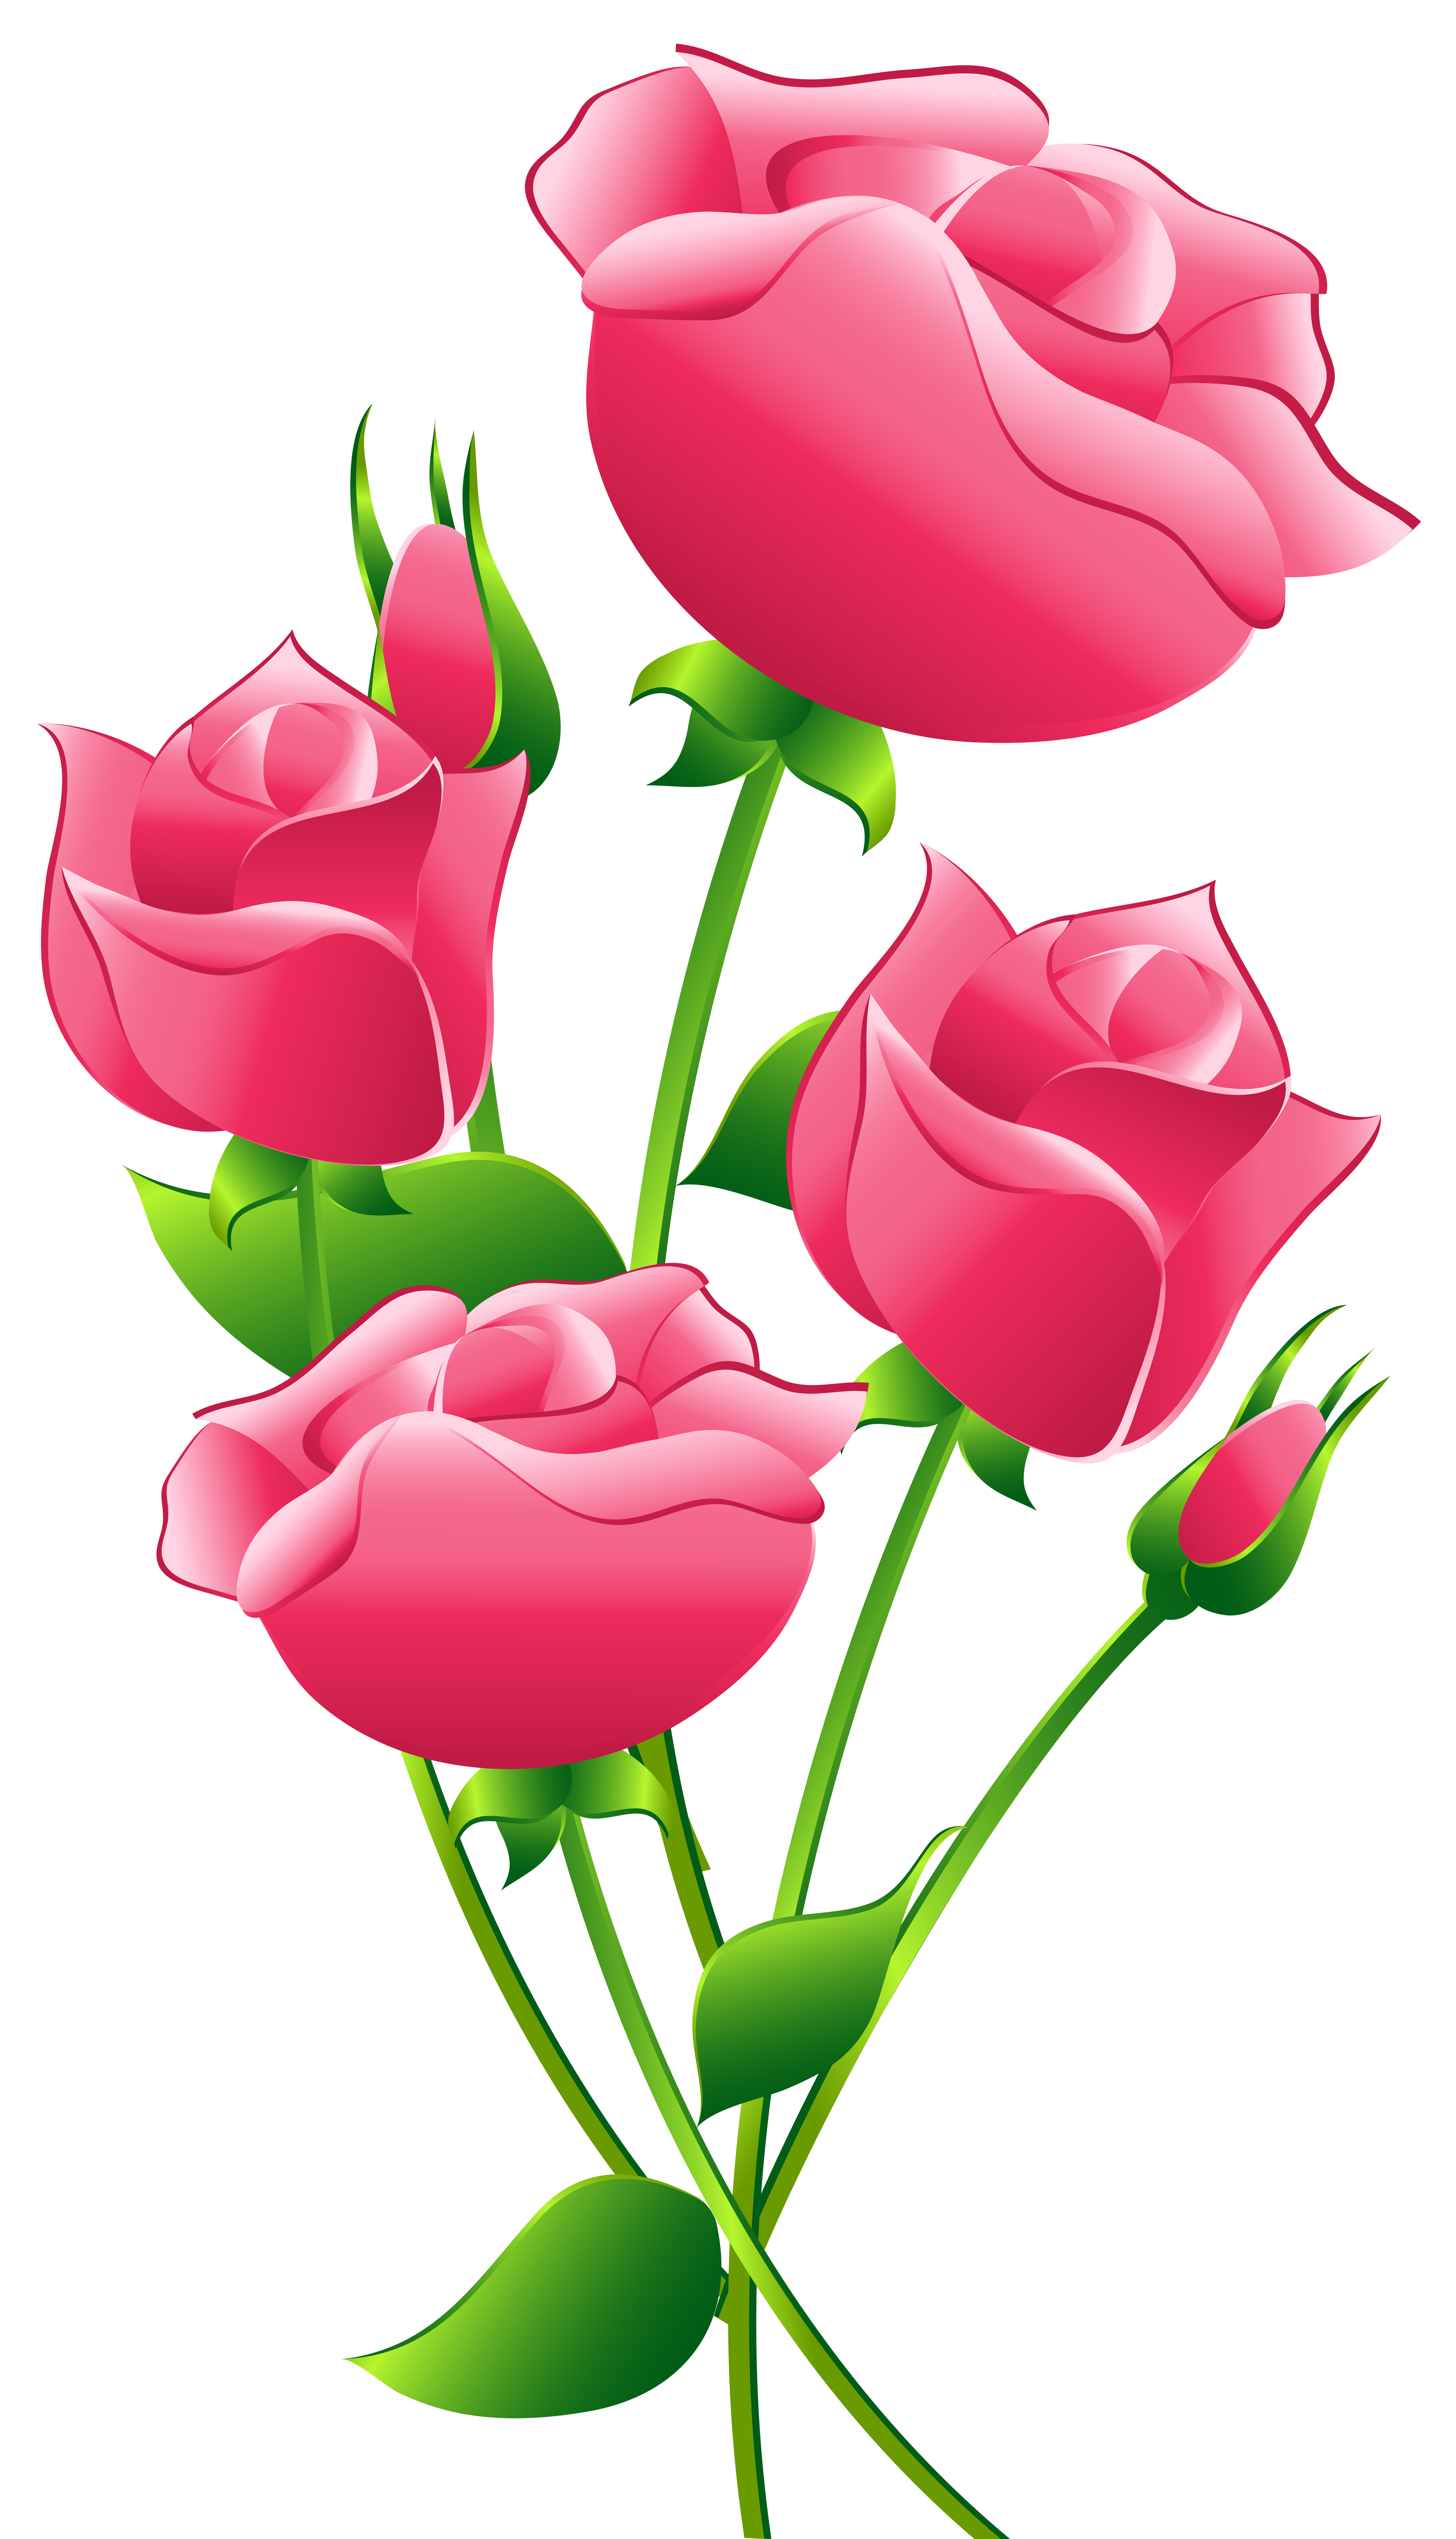 Roses steam rose clipart image.